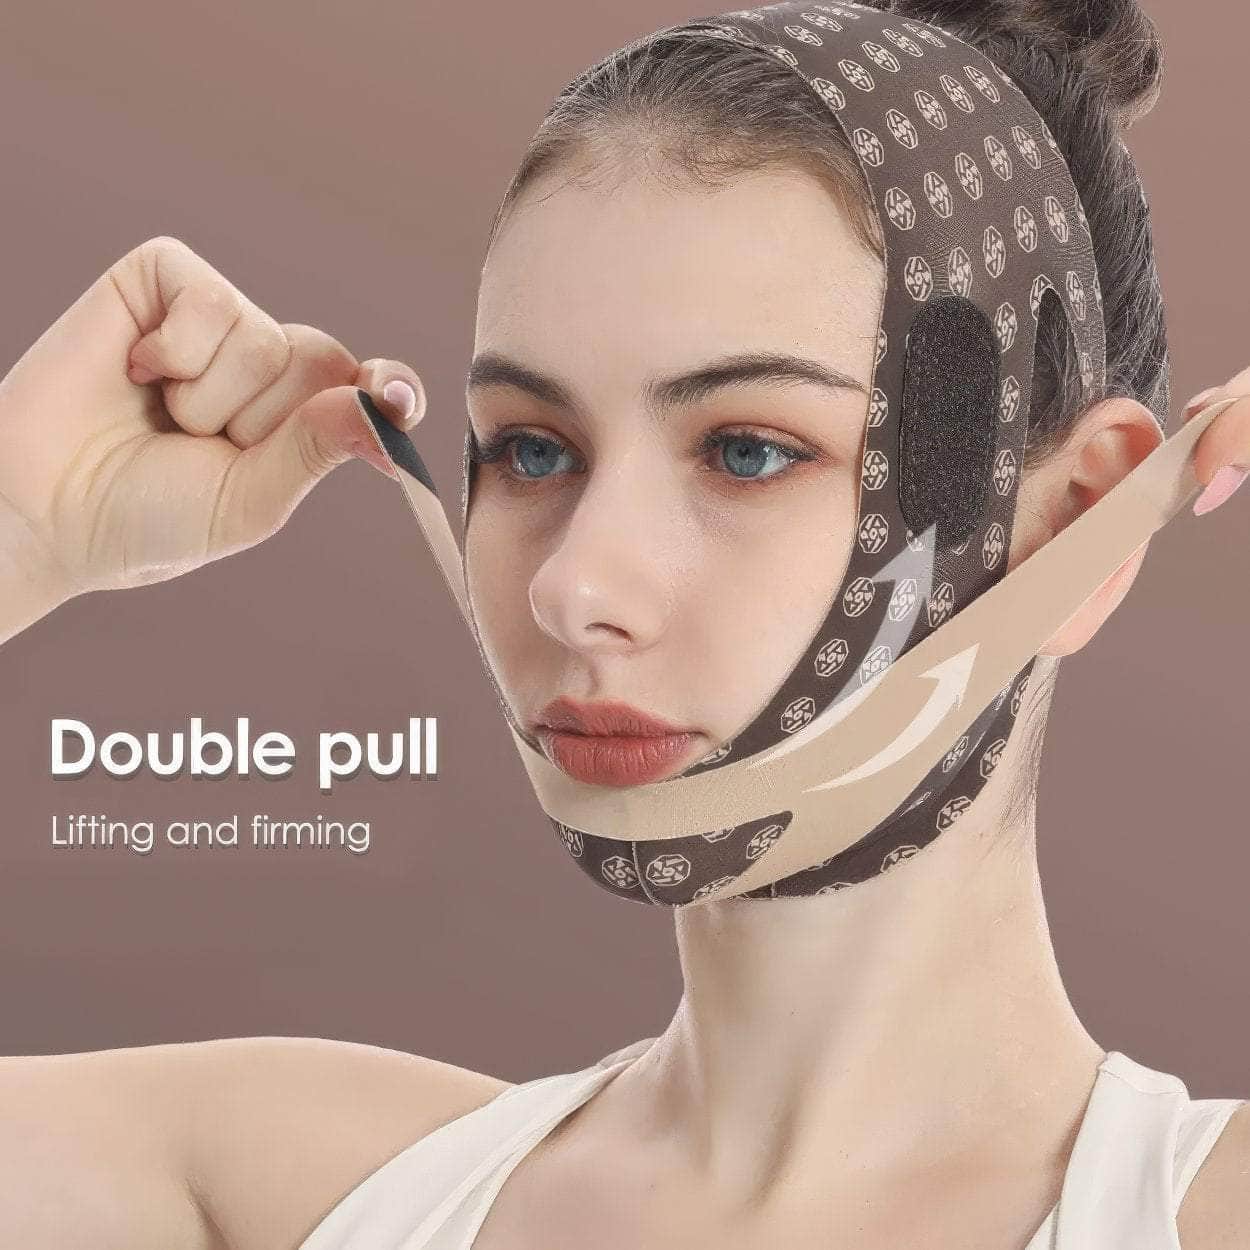 V-Line Shaping Face Mask for Chin Up, Face Sculpting, Facial Slimming, Sleep Mask, Face Lifting Belt